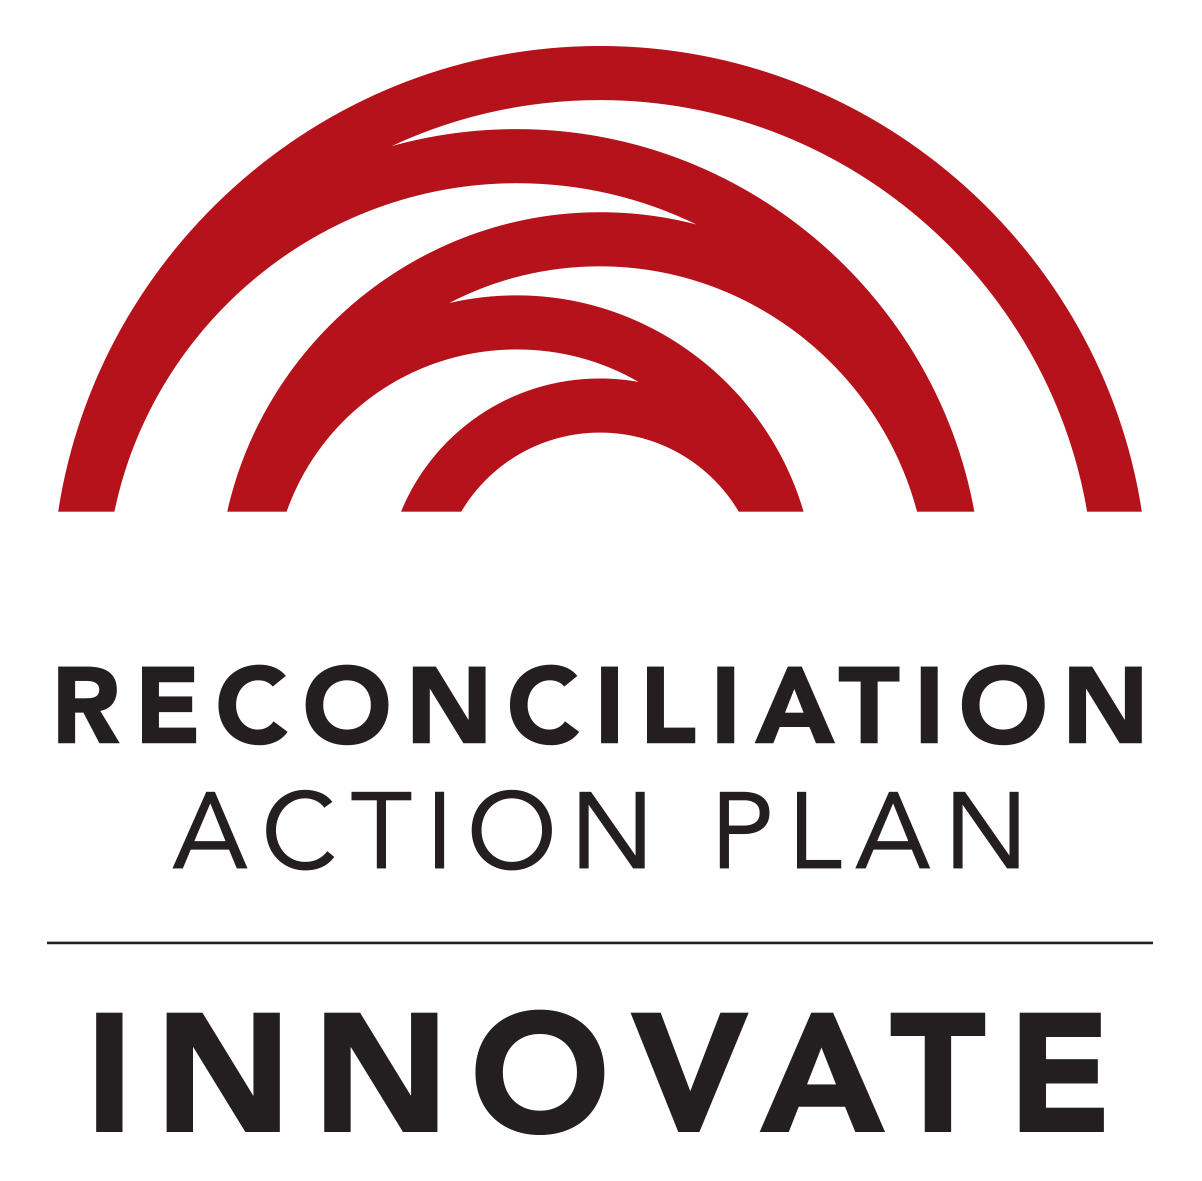 Reconciliation action plan | Innovate logo